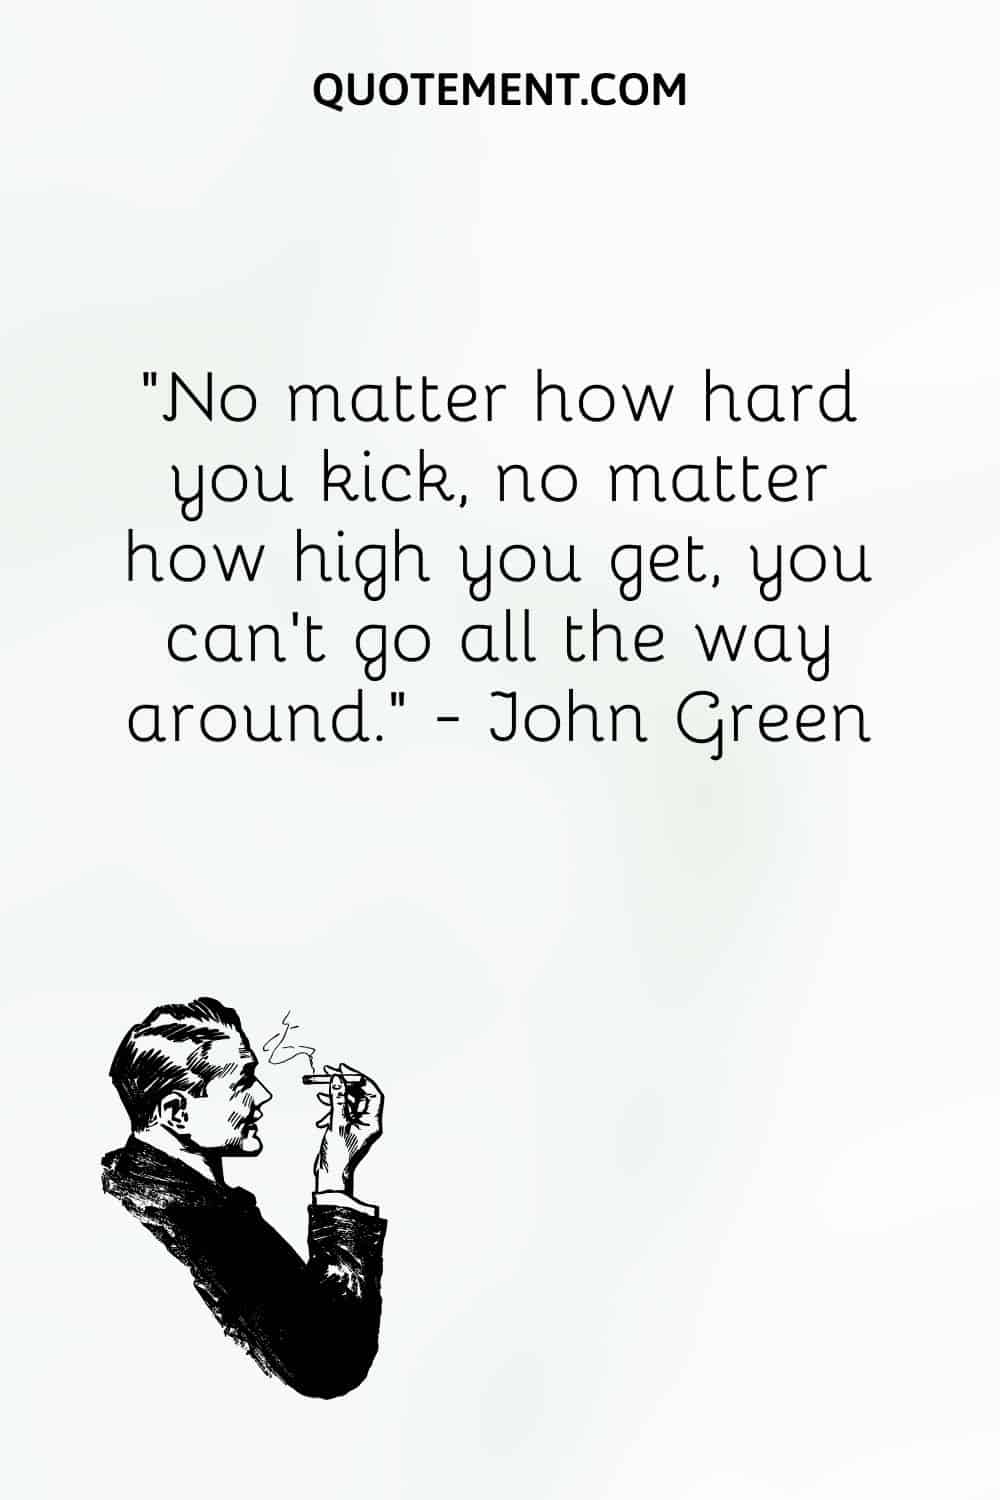 No matter how hard you kick, no matter how high you get, you can’t go all the way around